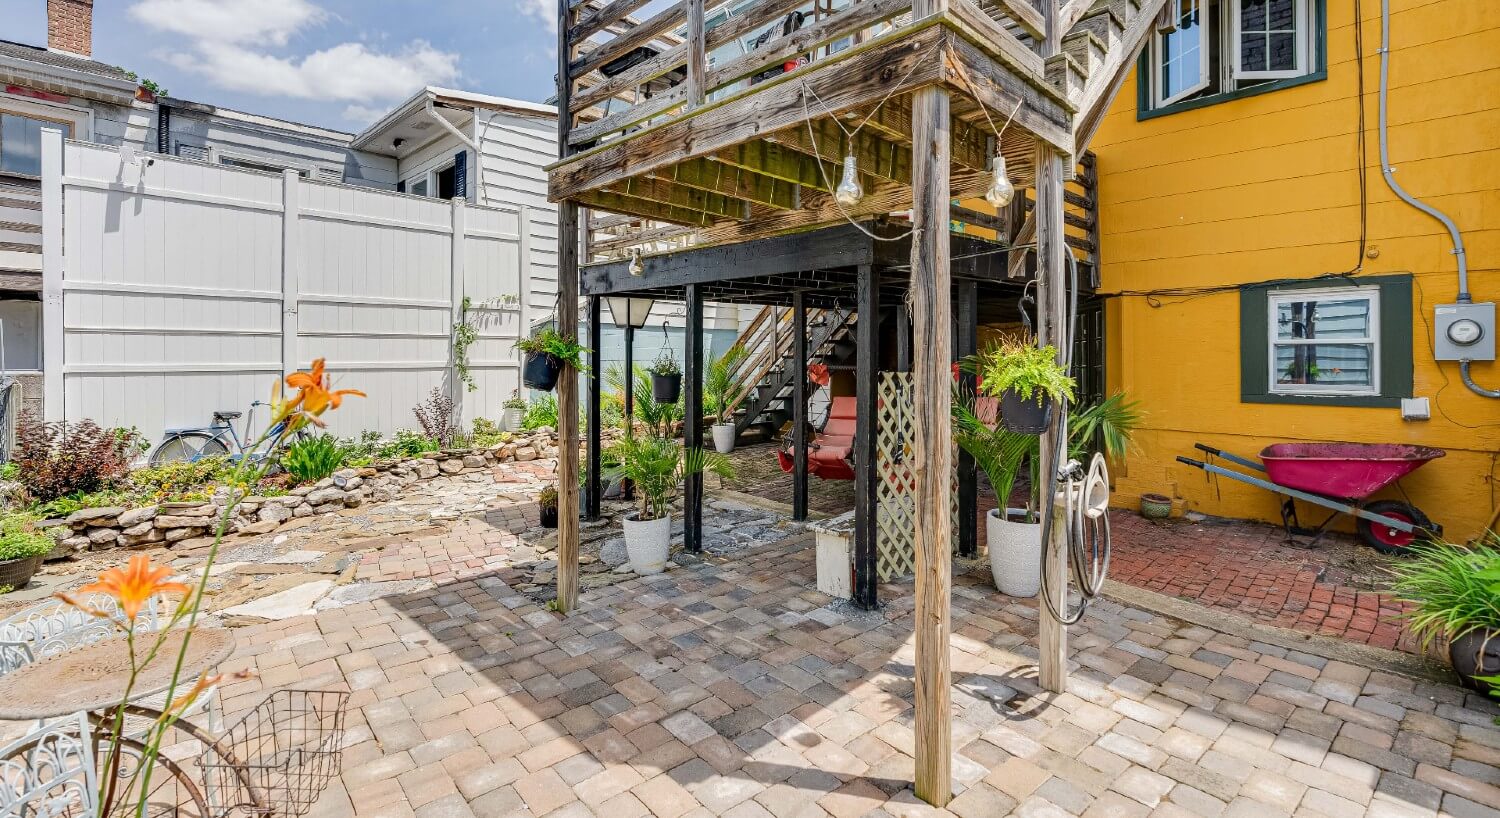 Backyard of a home showing a wood deck, hanging chairs, potted plants and a red wheelbarrow